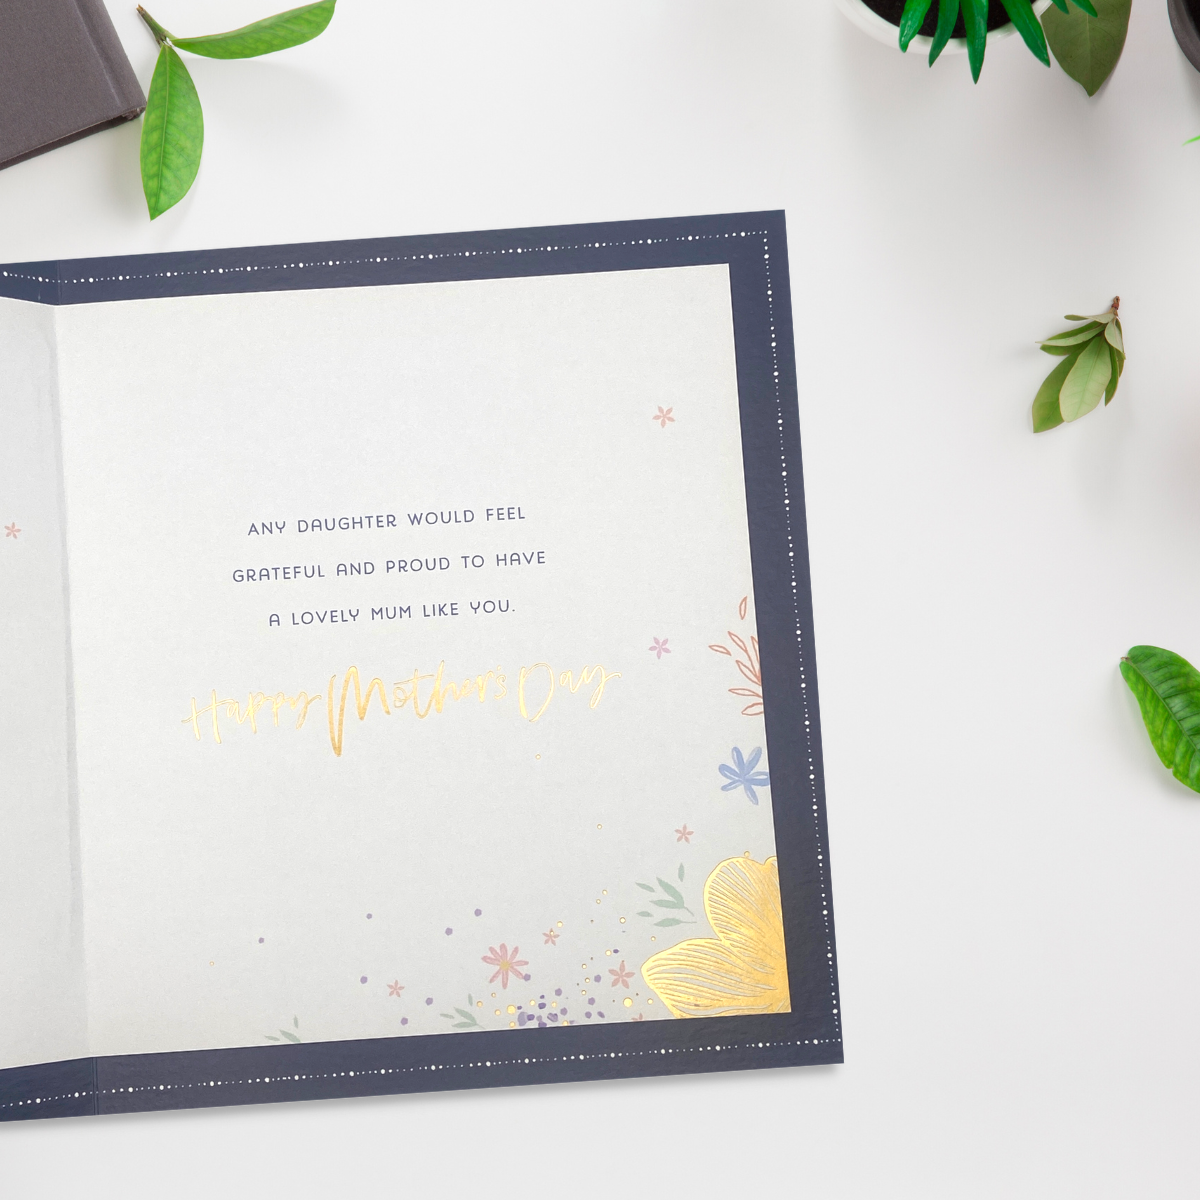 Inside image with navy border and coloured insert with gold foil